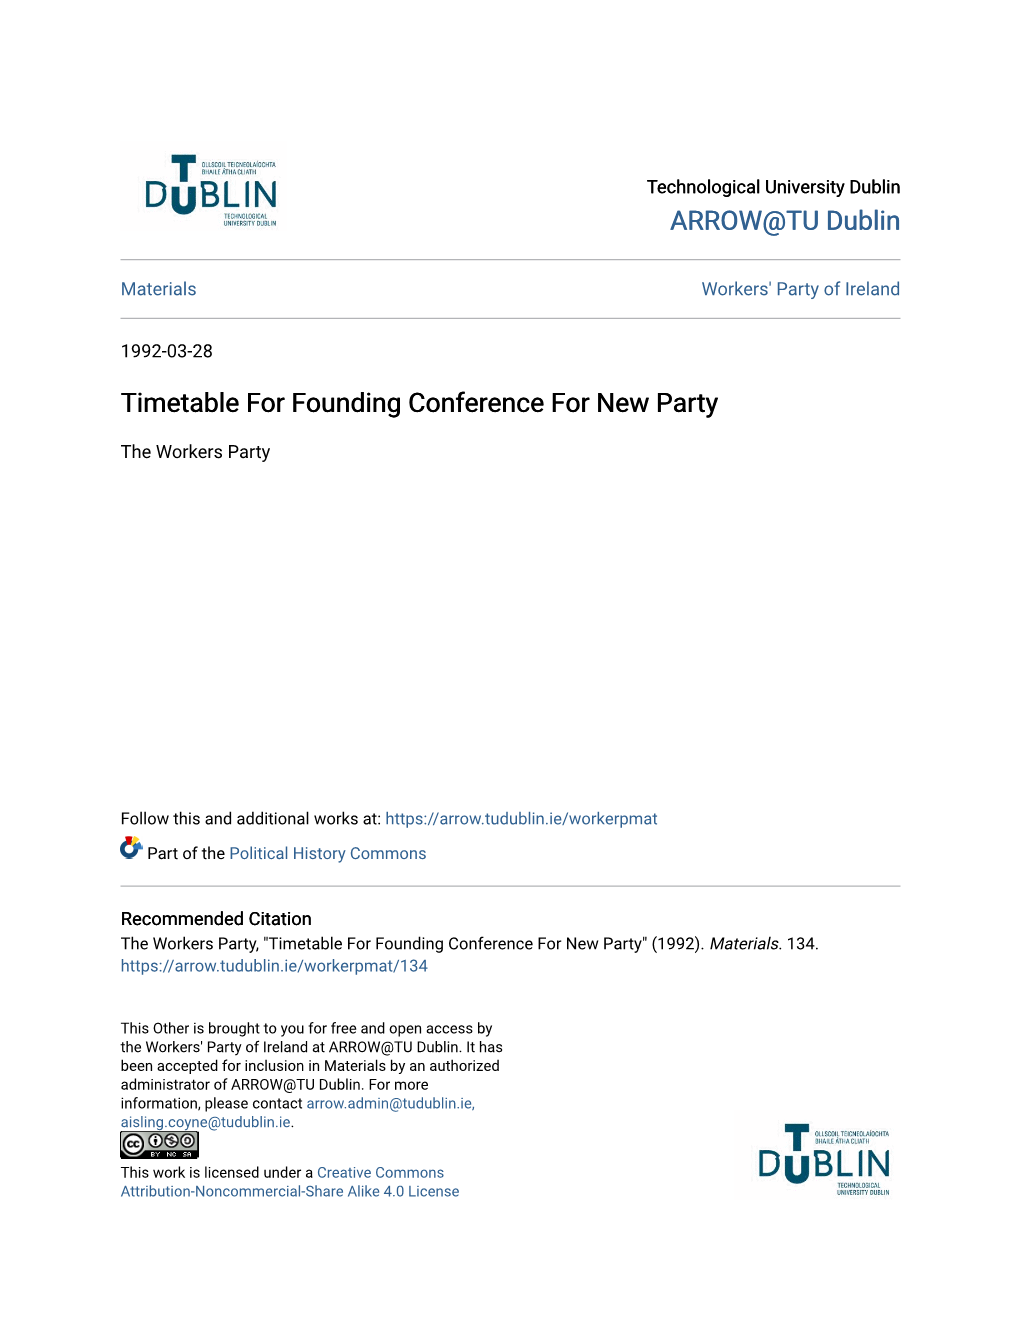 Timetable for Founding Conference for New Party